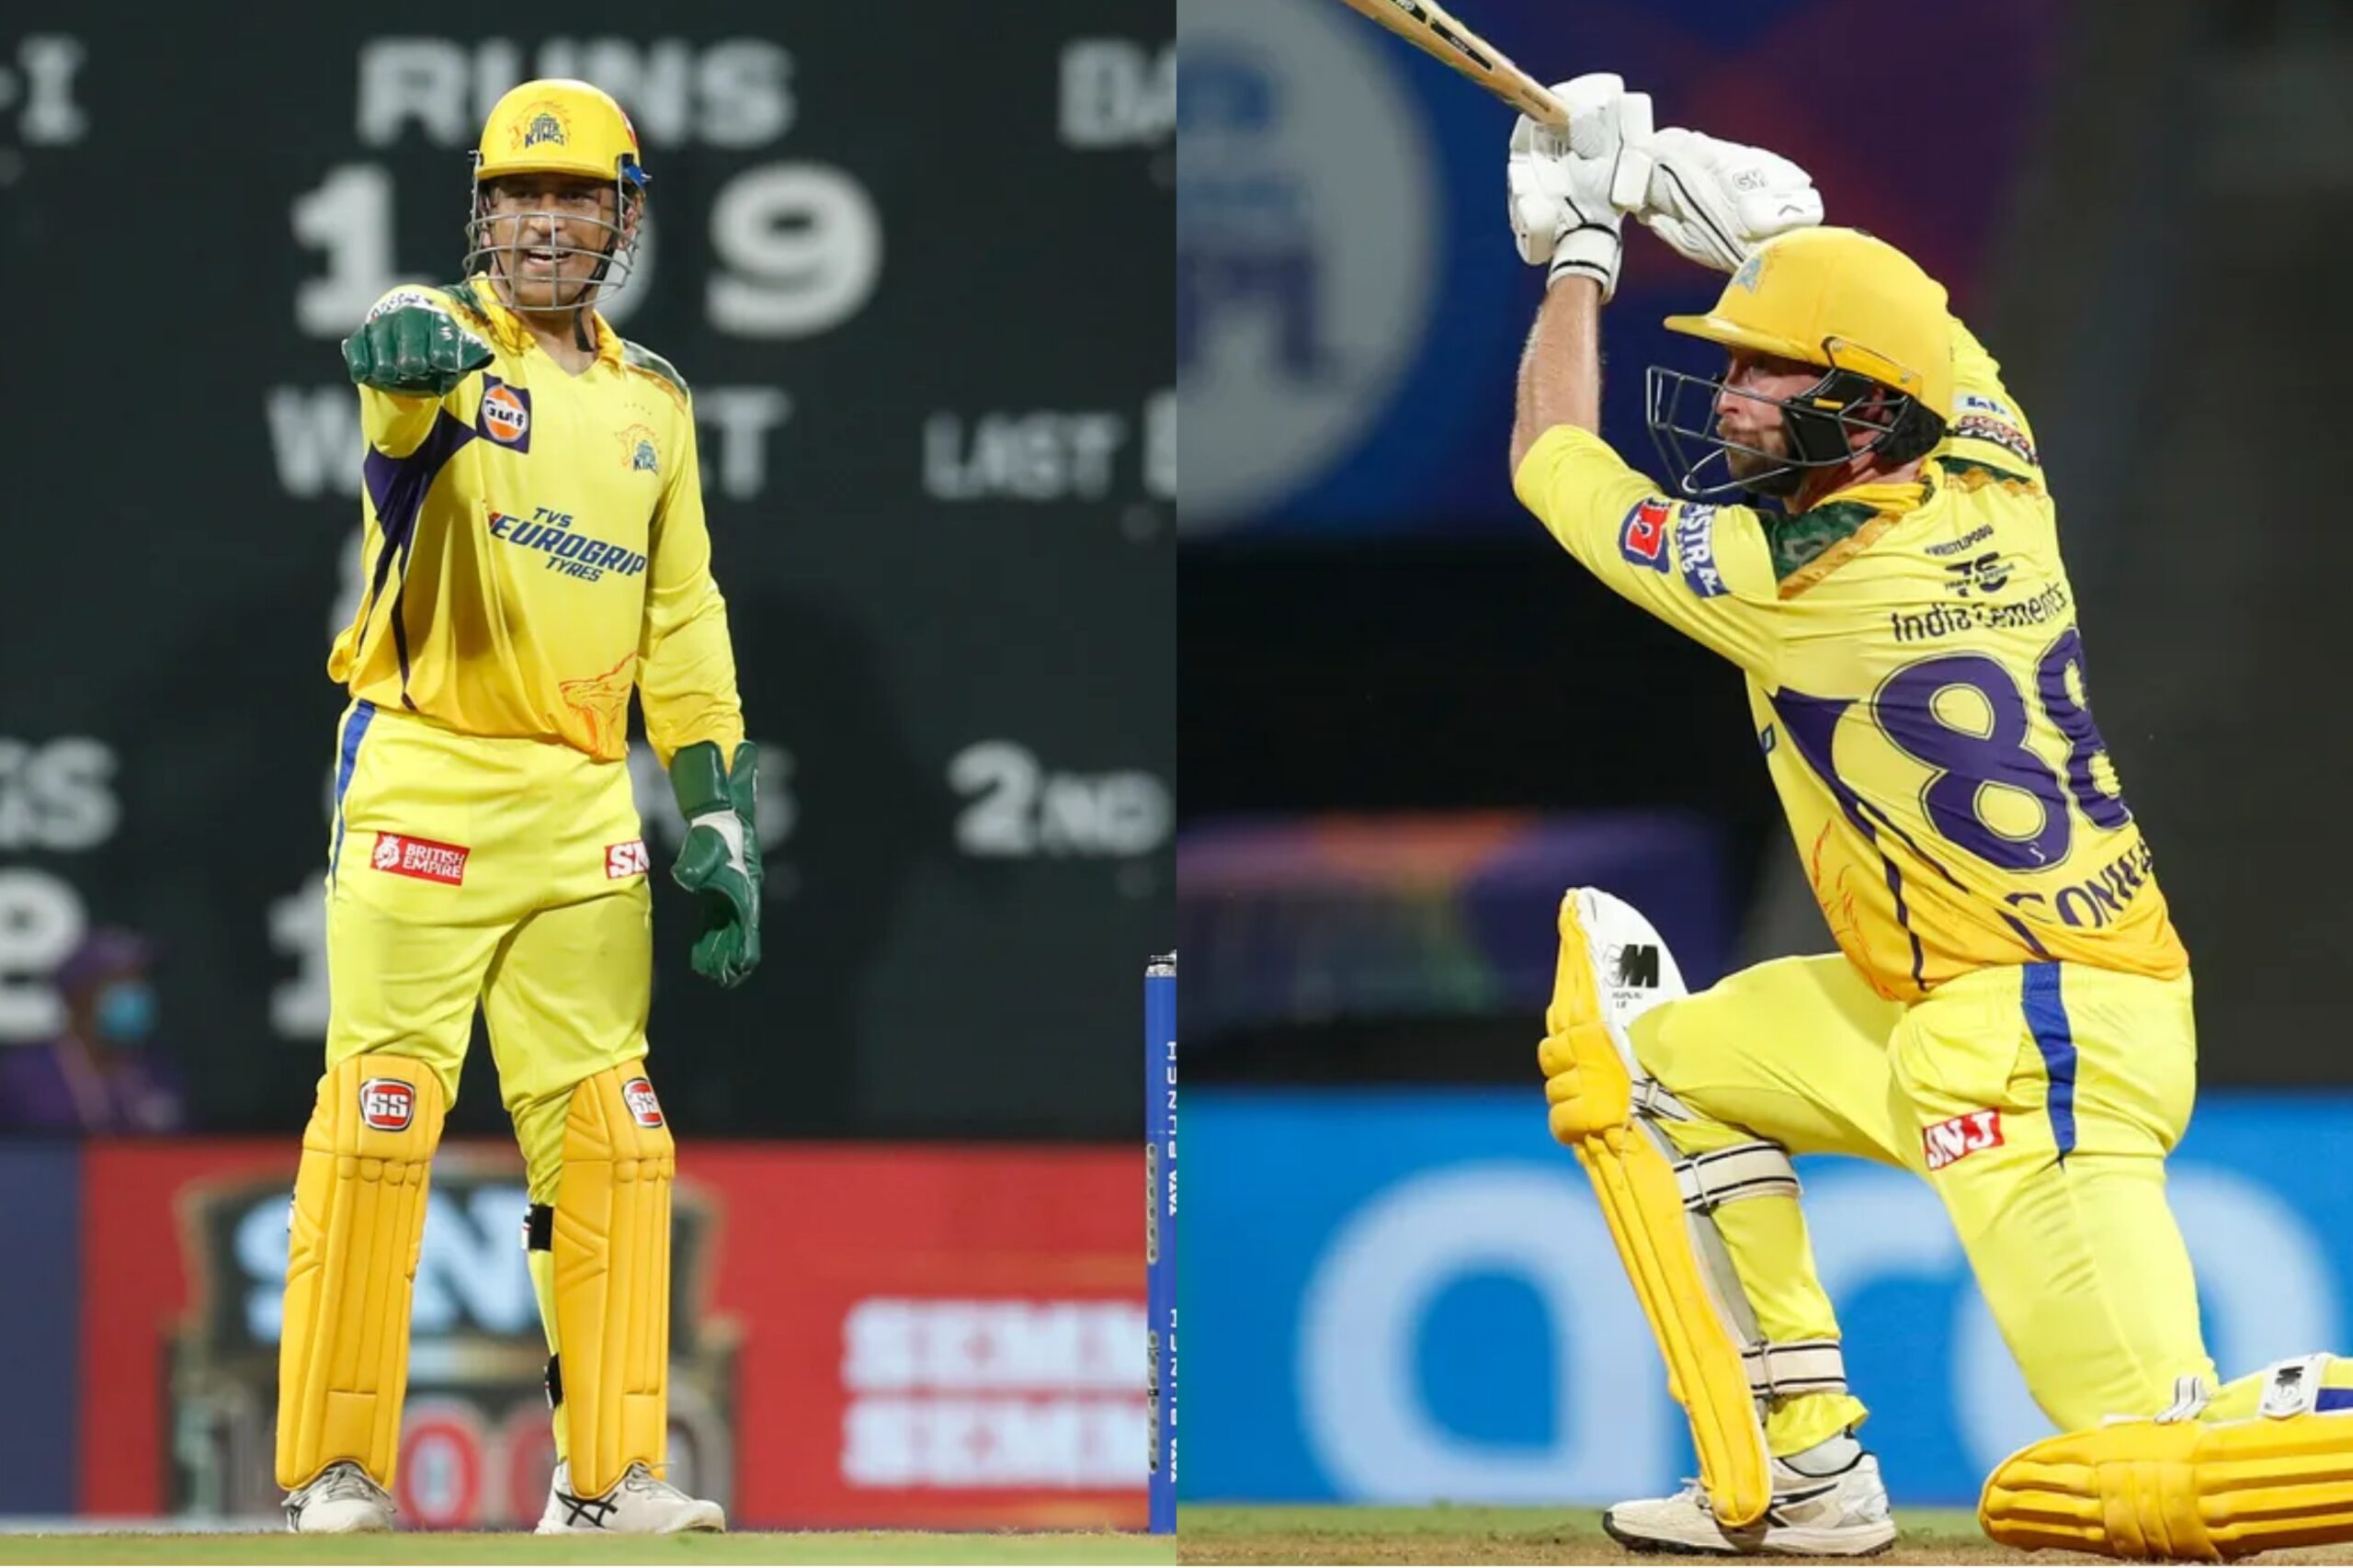 Conway and dhoni scaled